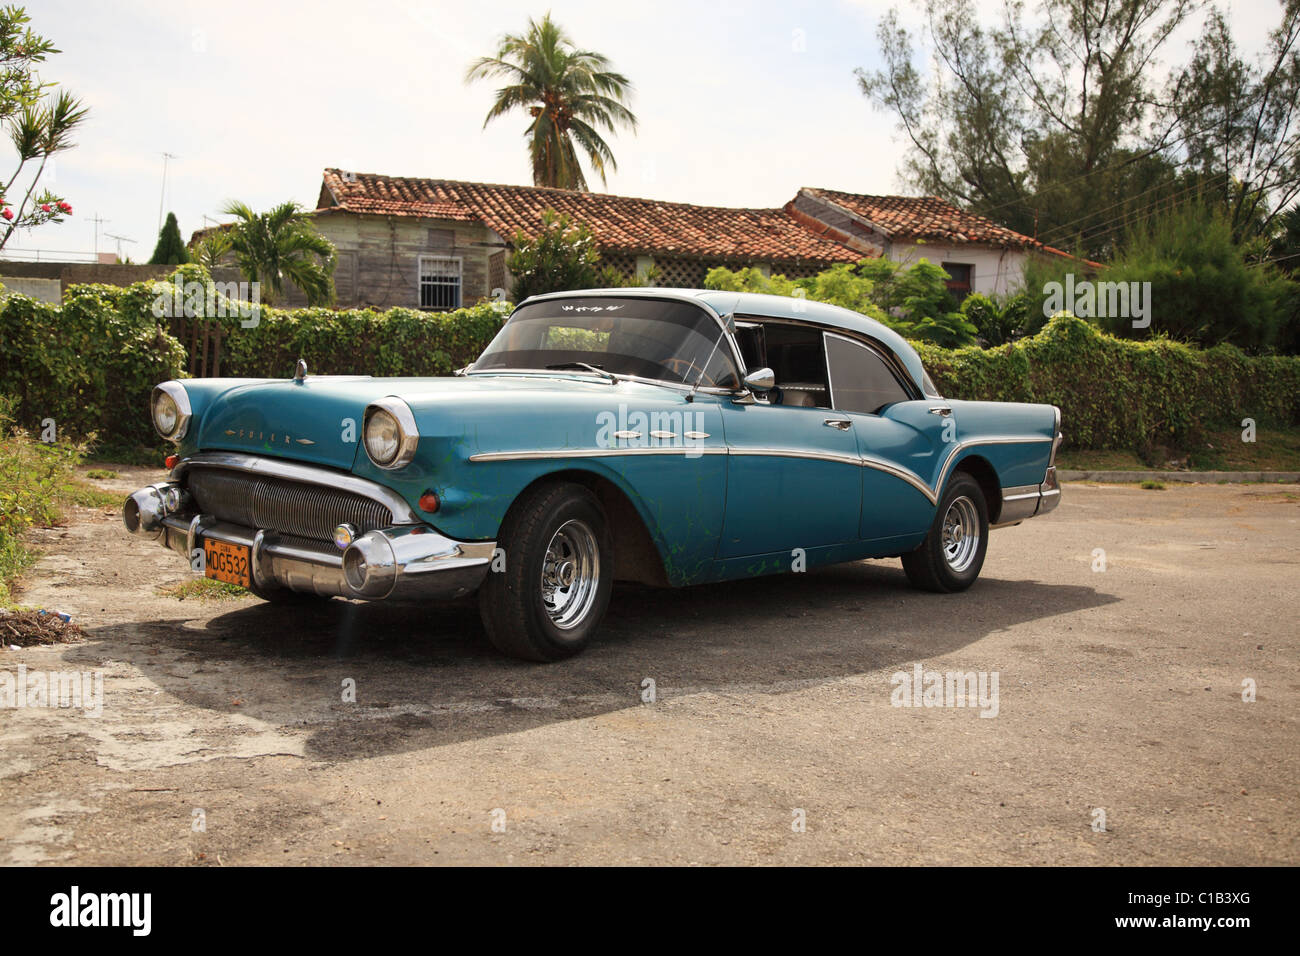 Old blue Buick car in Cuba Stock Photo